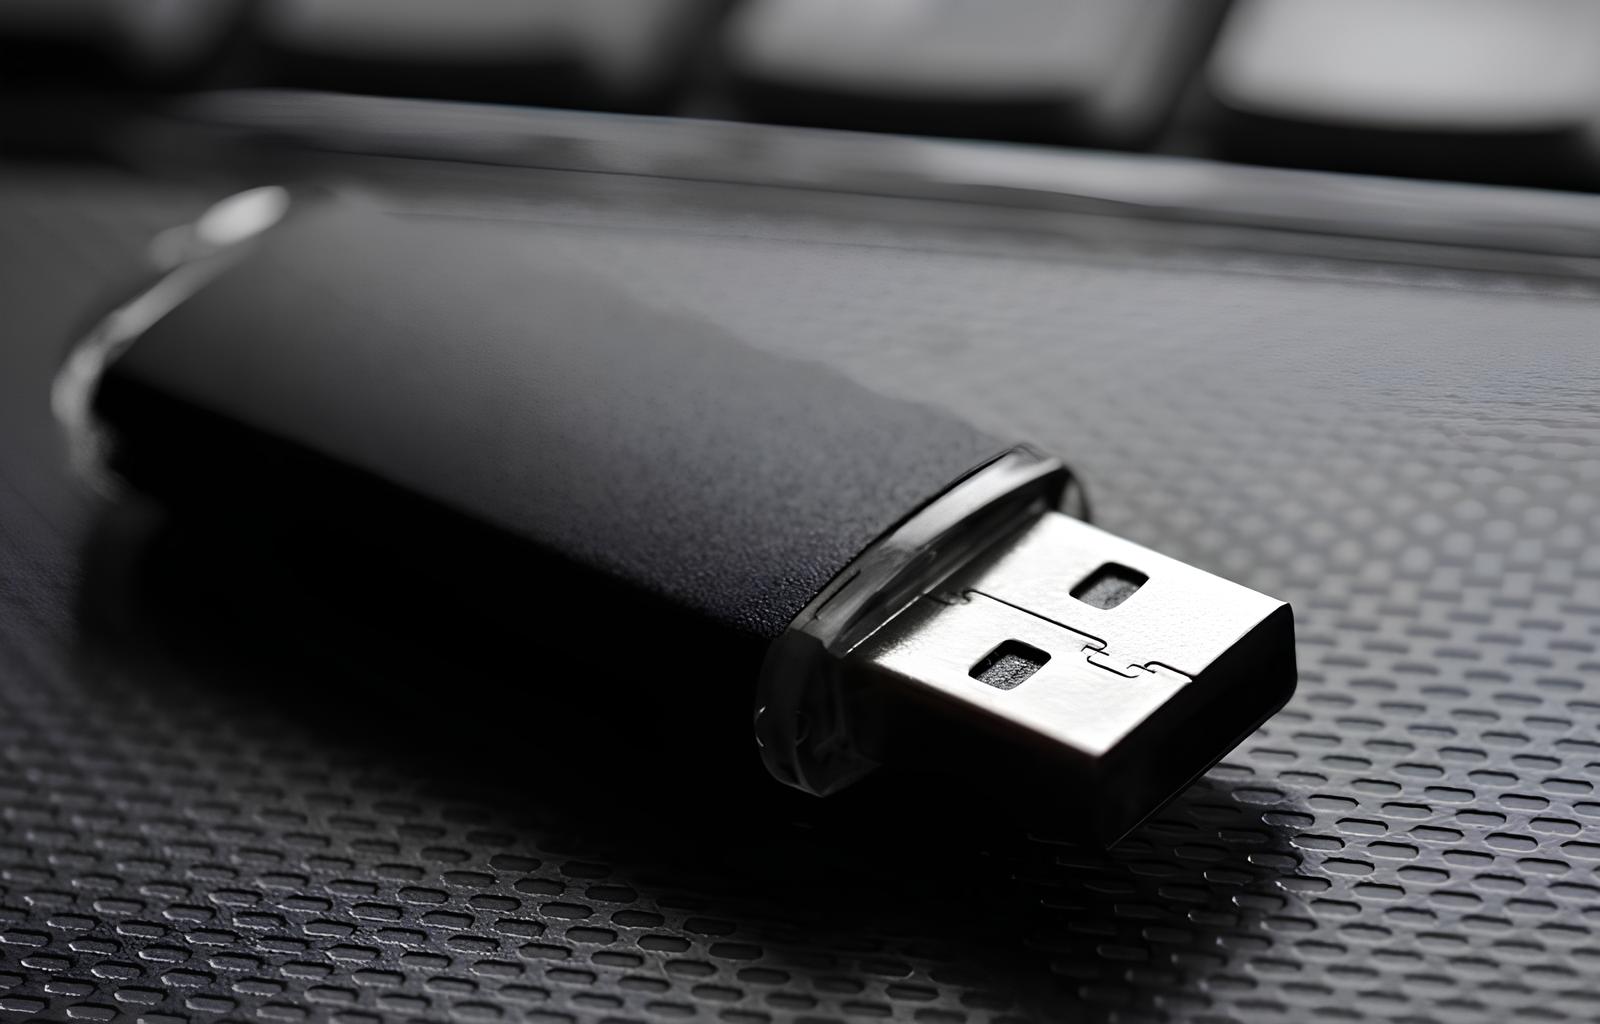 Creating Wi-Fi Hotspot With USB Dongle: Easy Steps